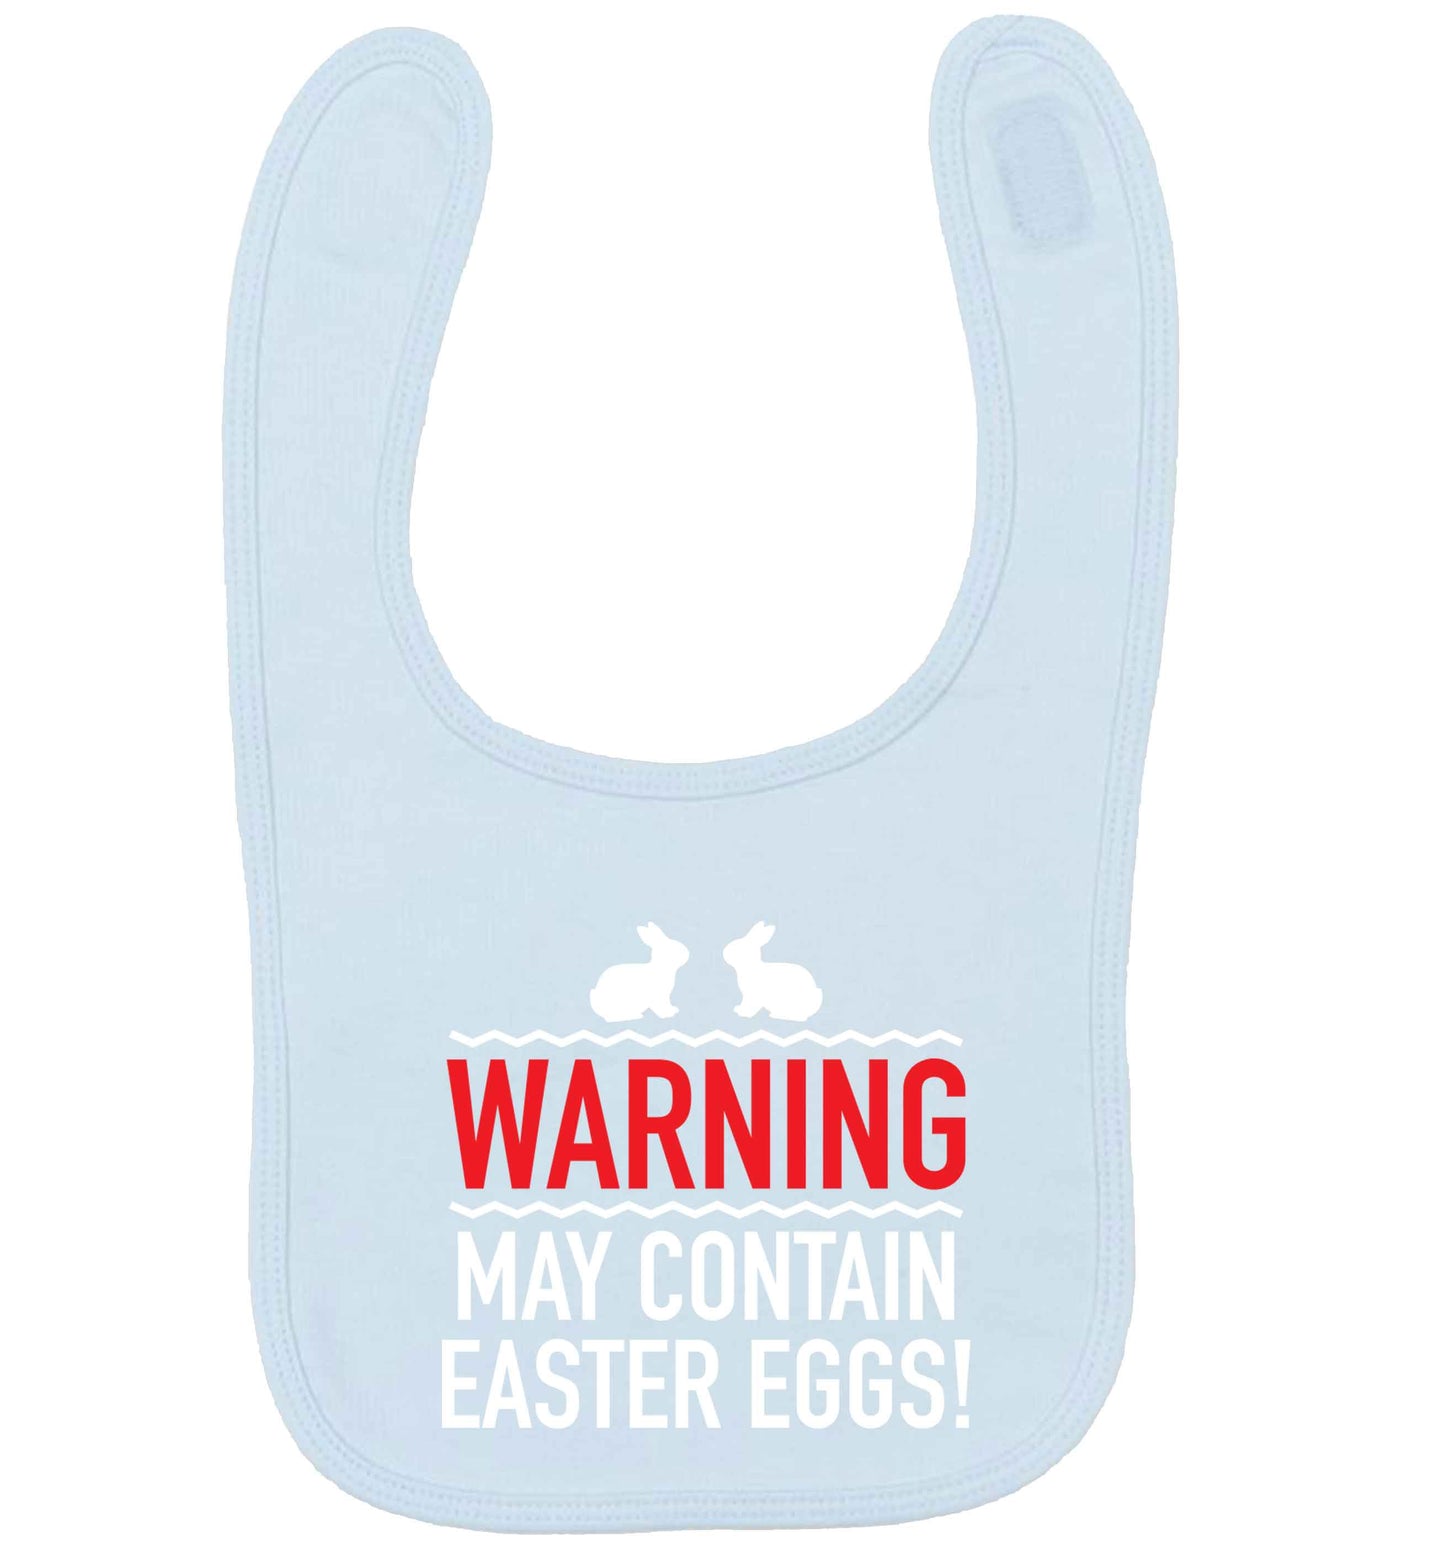 Warning may contain Easter eggs pale blue baby bib